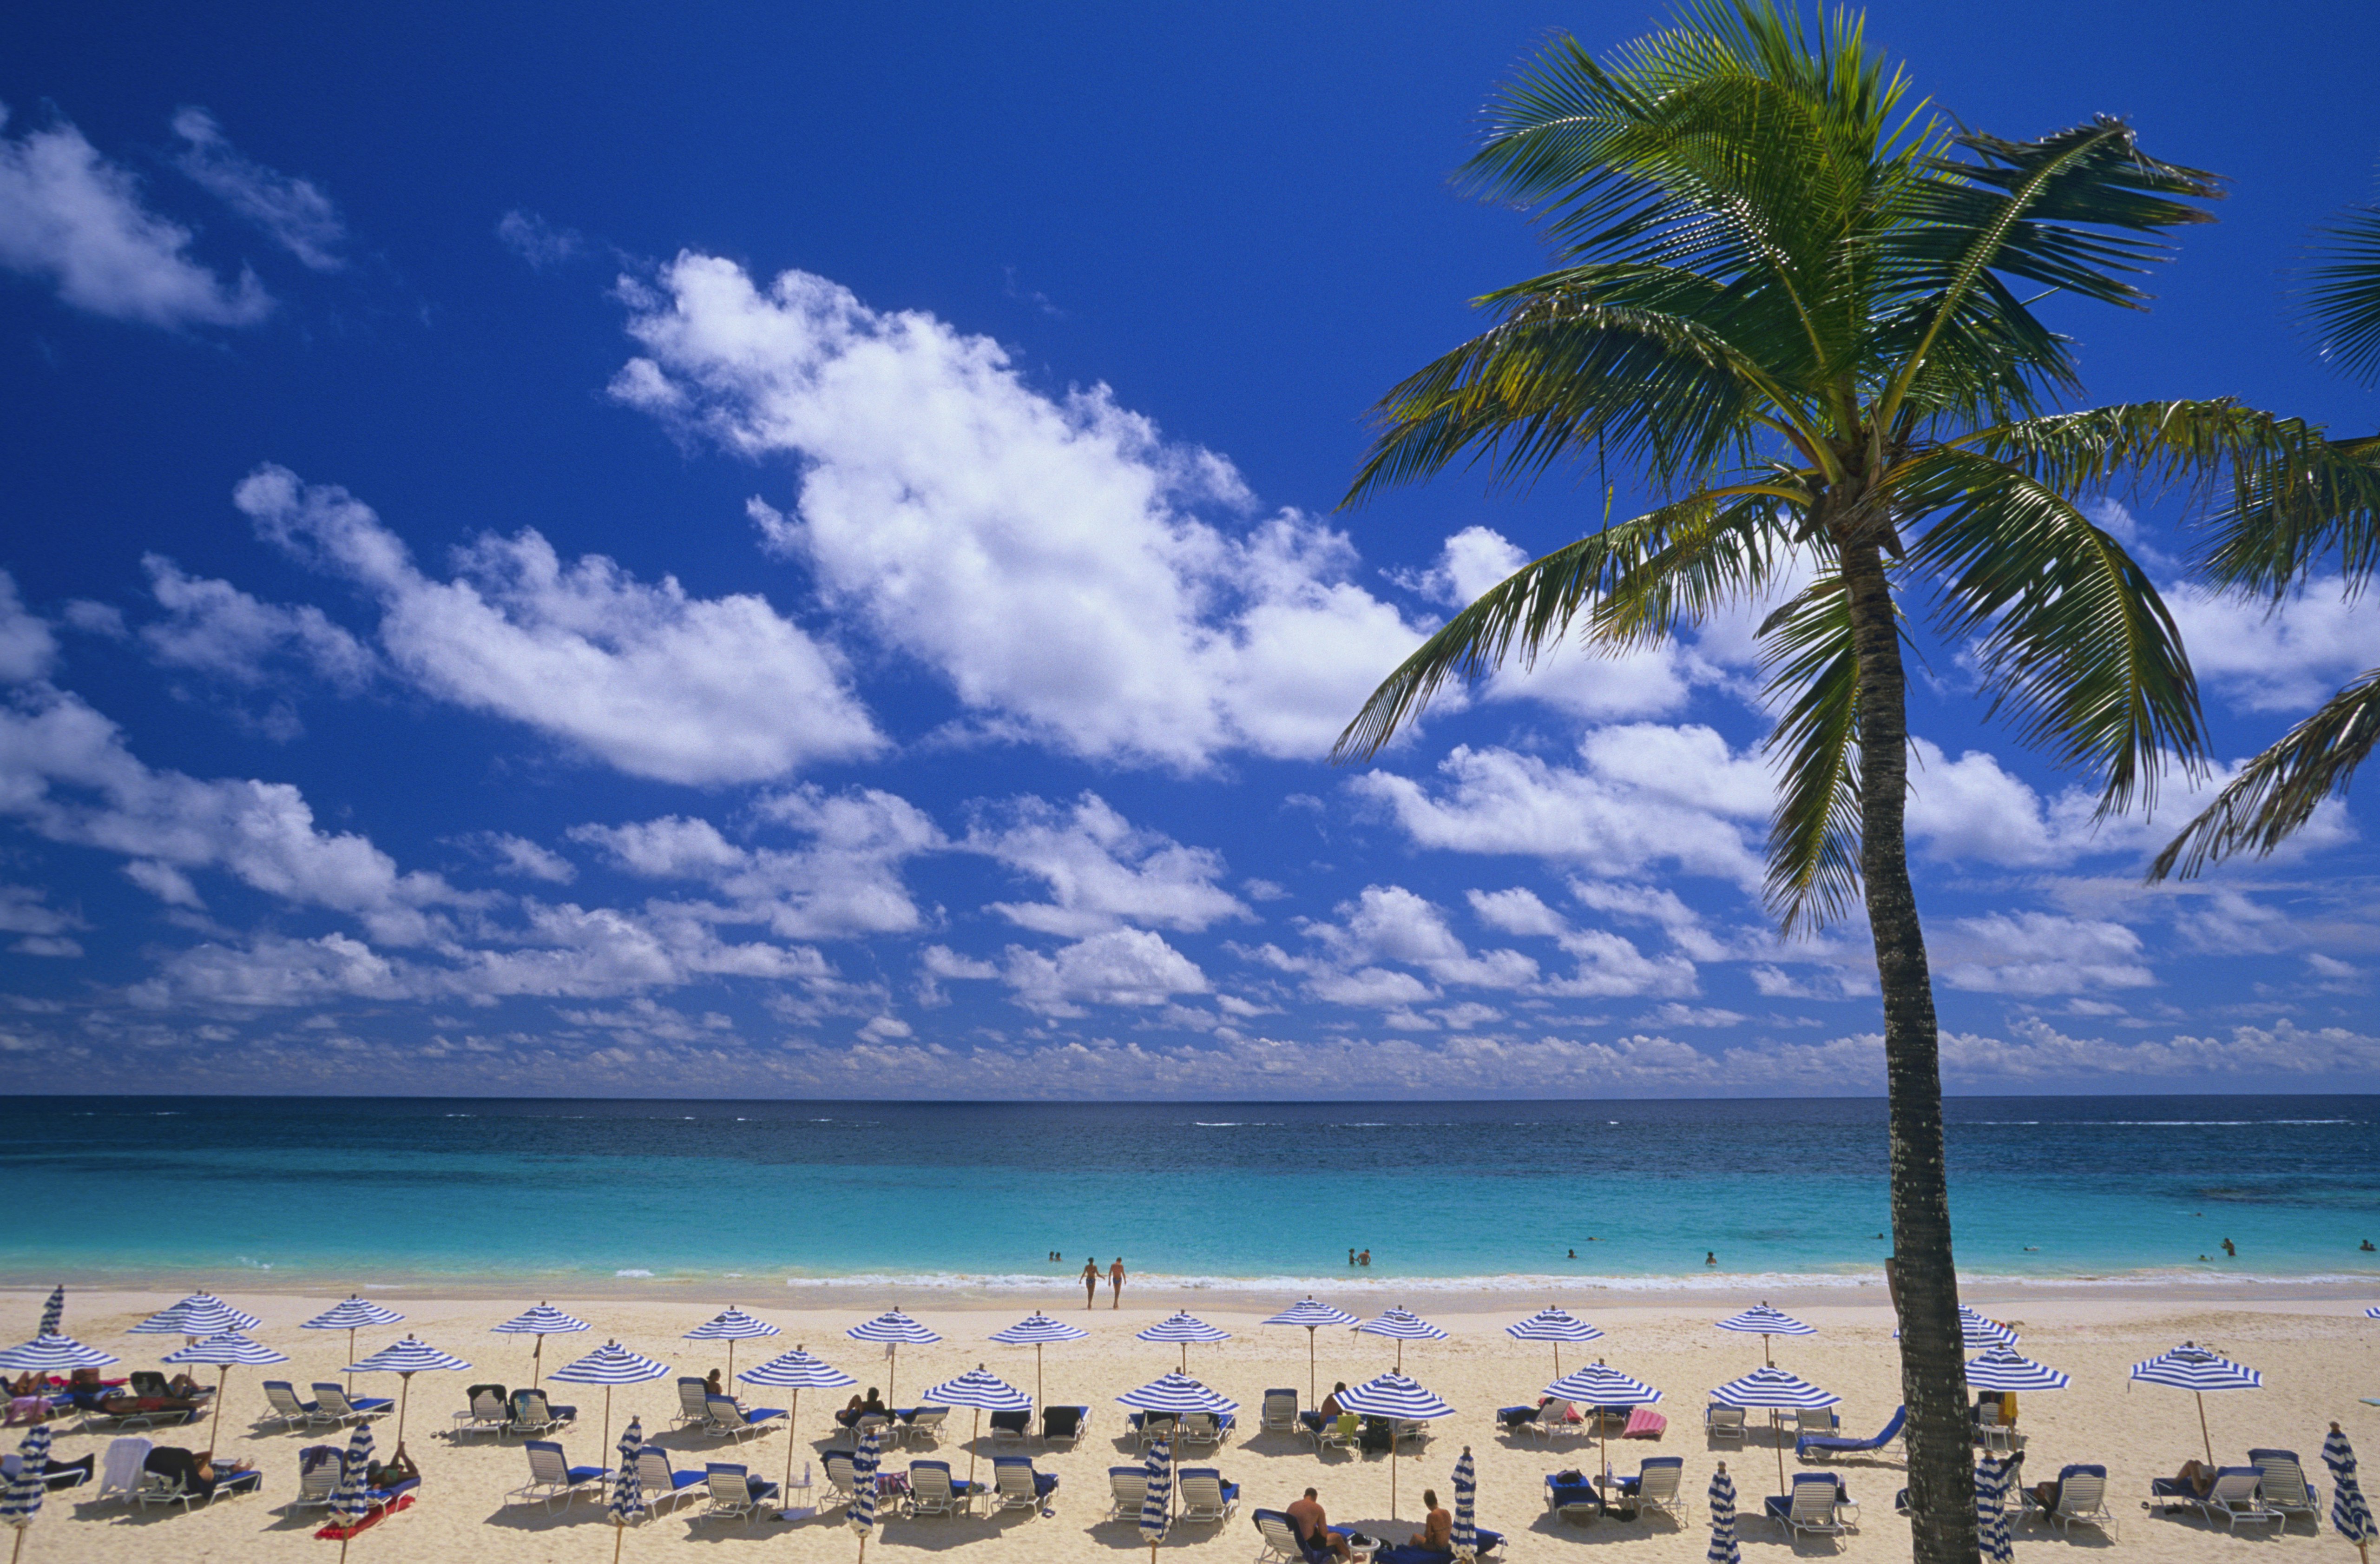 Elevated view of a two rows of beach chairs and blue and white stripe umbrellas on the beach. There is a large palm tree in the foreground and in the background is the bright blue ocean. 